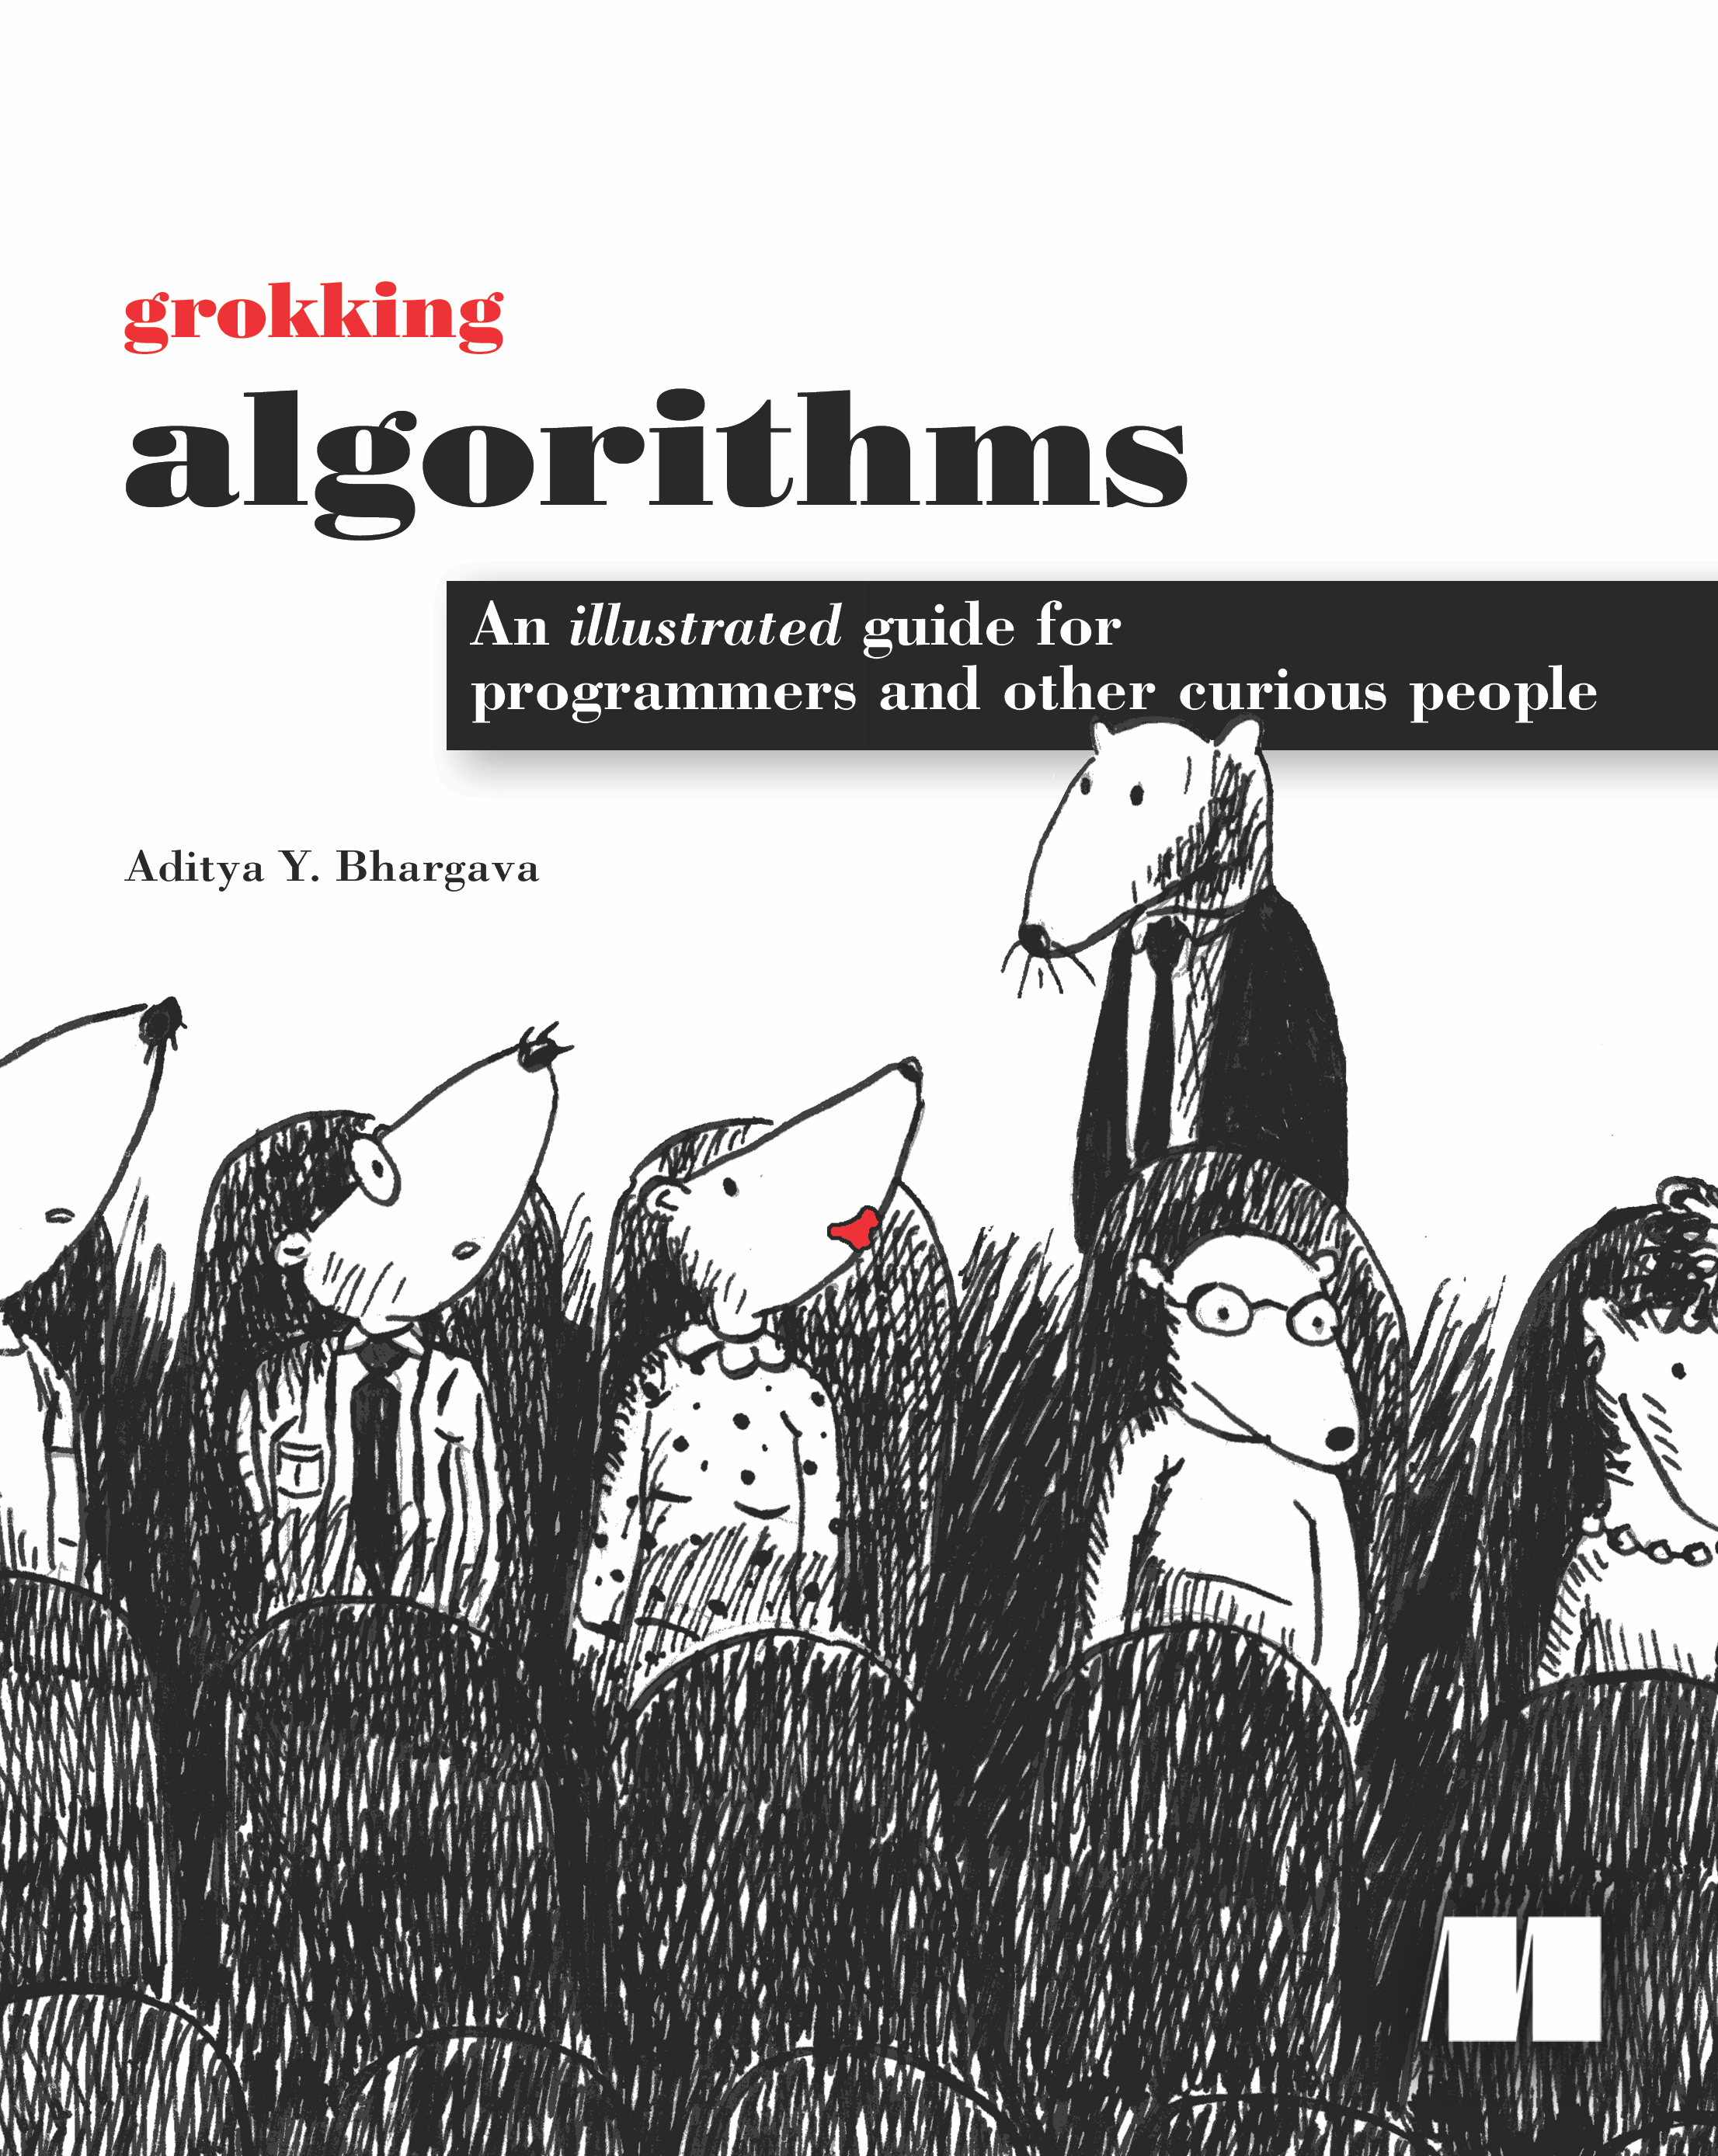 Grokking Algorithms 
An illustrated guide for programmers and other curious people by Aditya Y. Bhargava